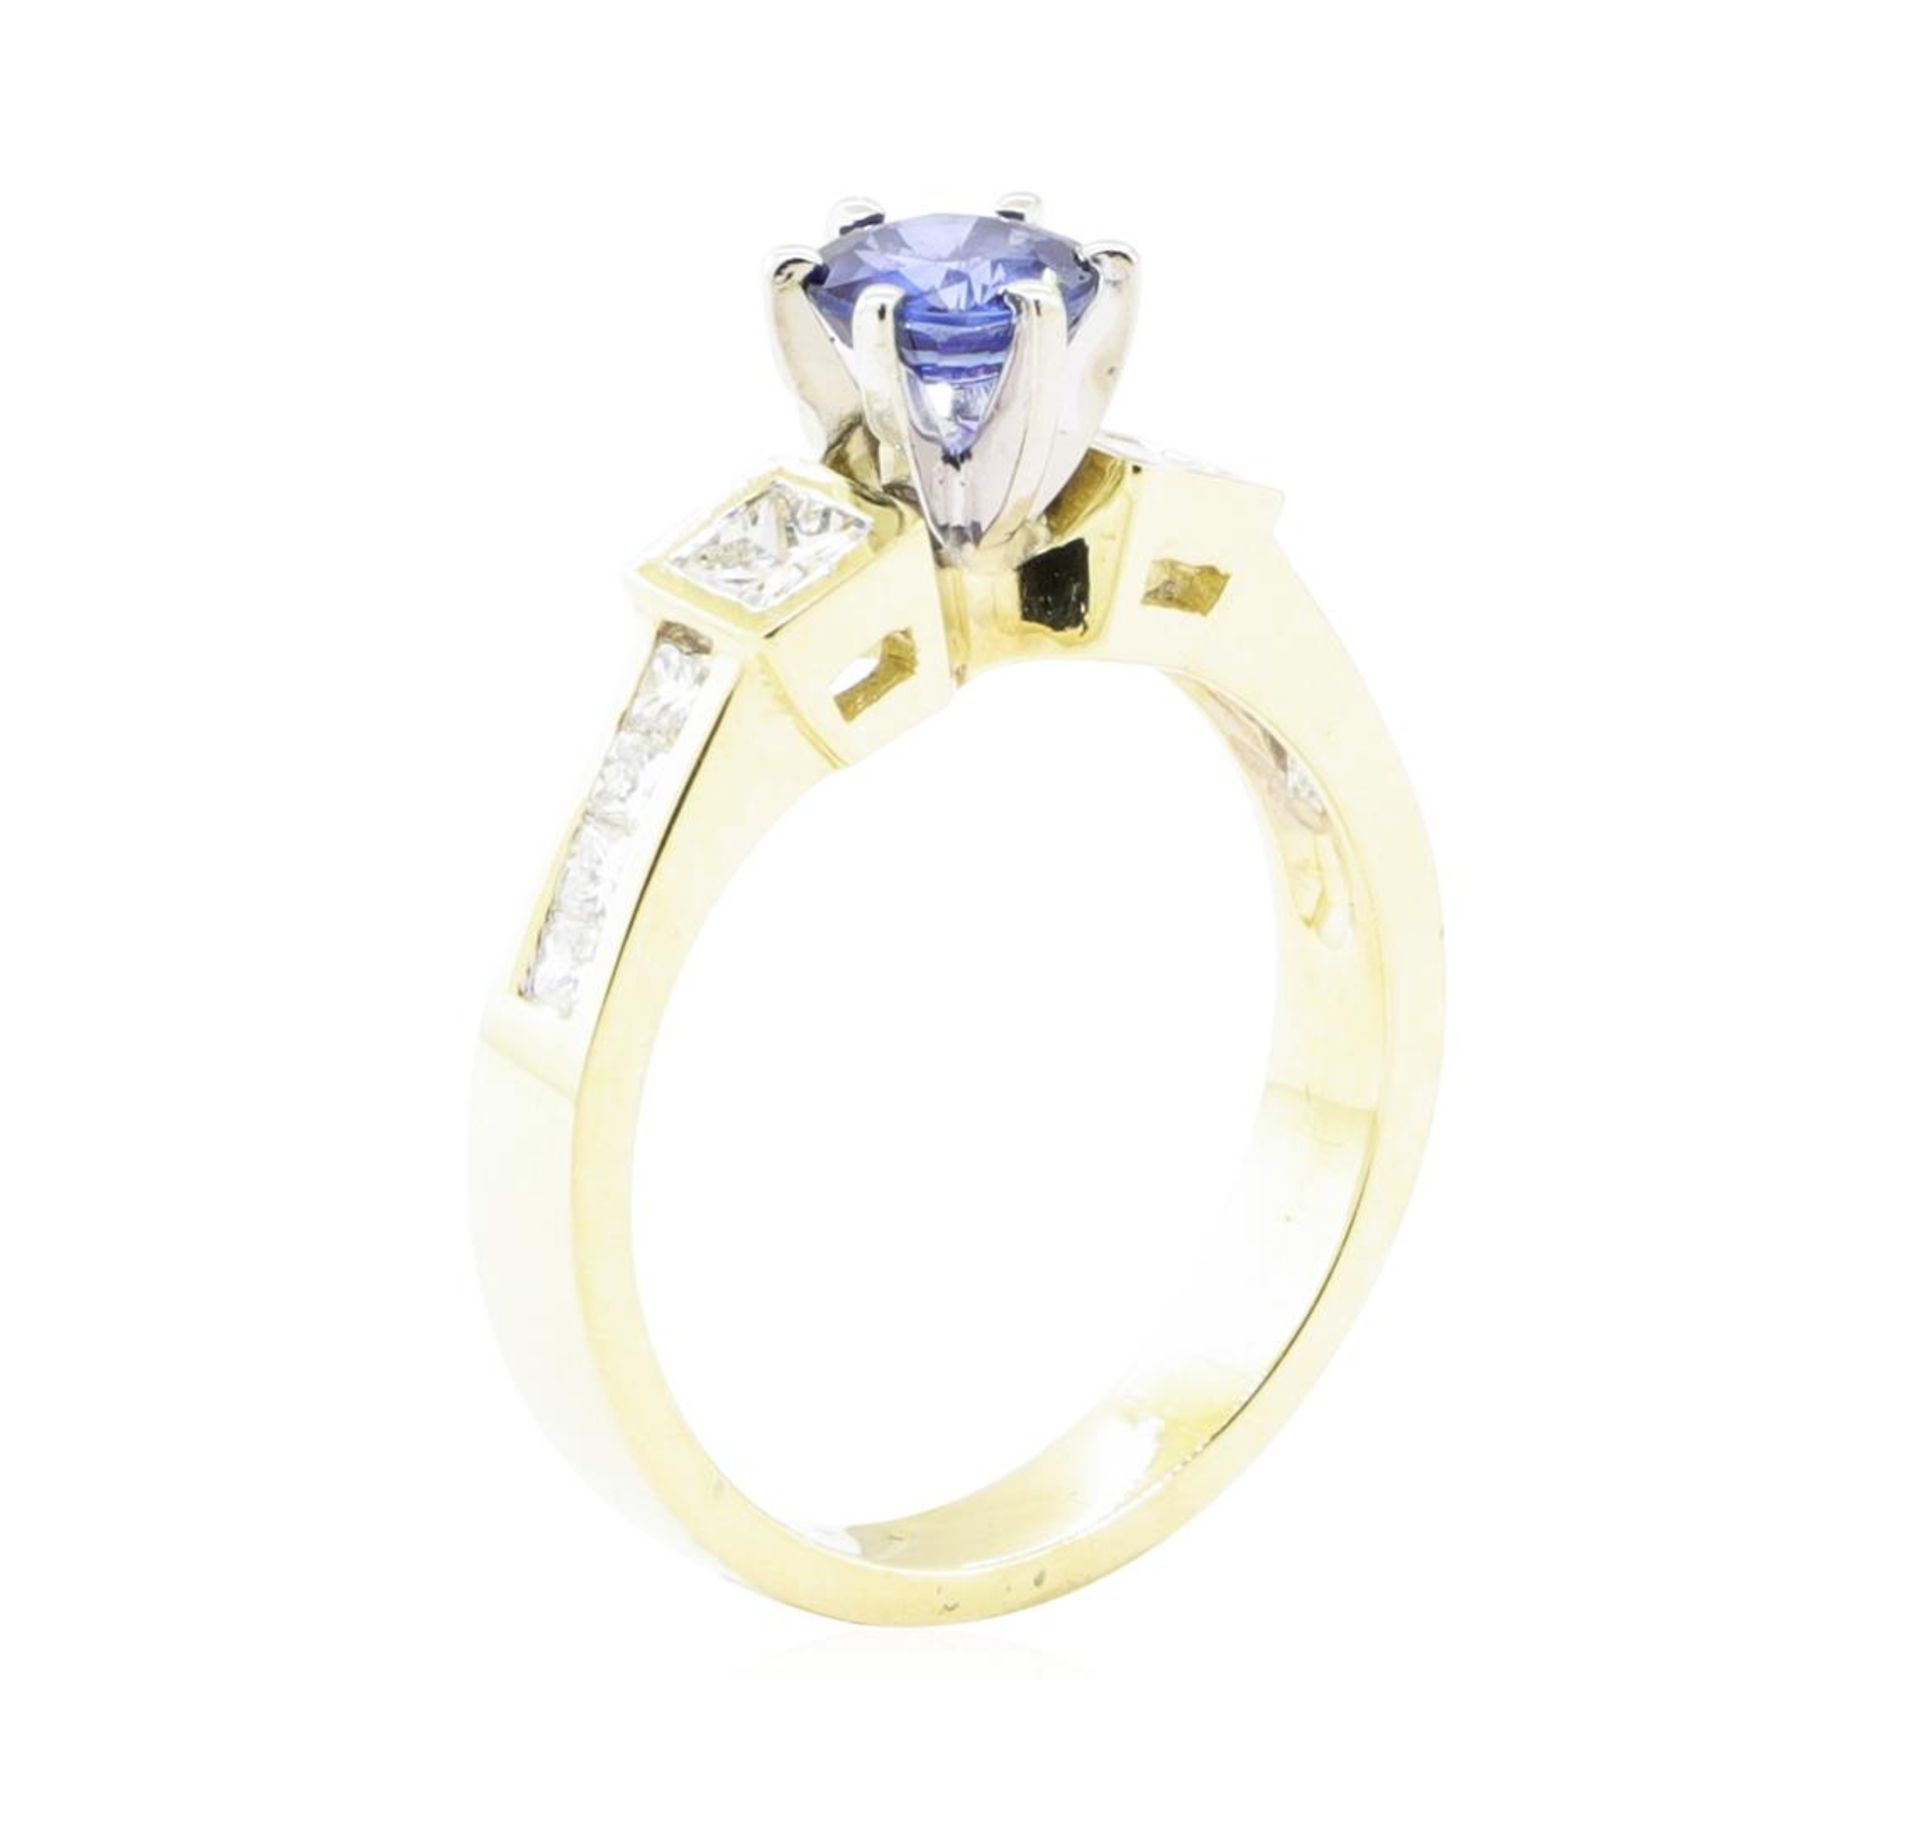 1.24 ctw Sapphire And Diamond Ring - 14KT Yellow Gold - Image 4 of 5